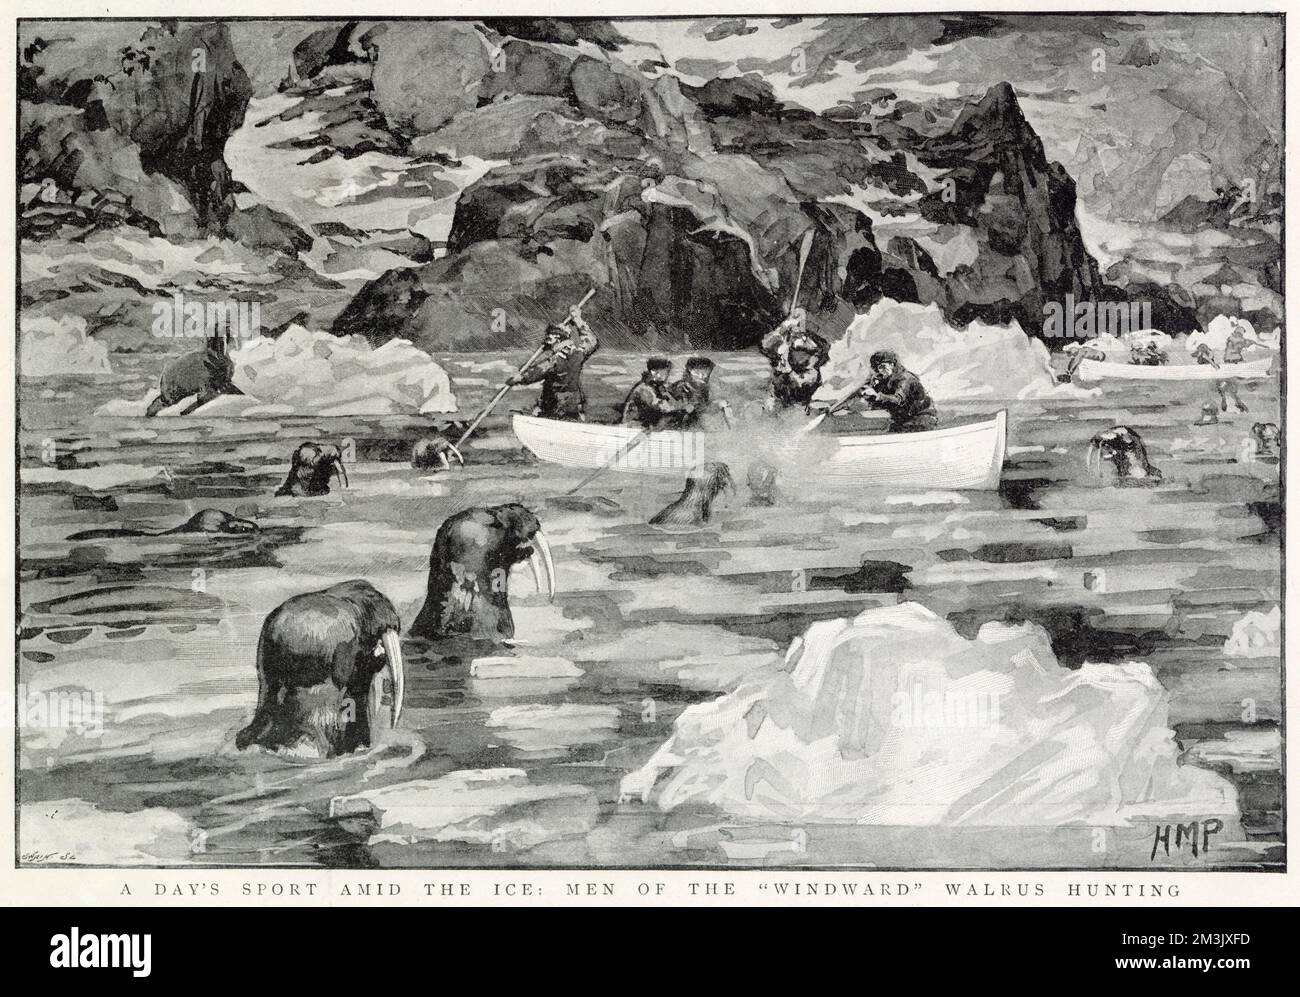 Crew of the Jackson-Harmsworth Polar Expedition, in their boats shooting walrus, near Franz Josef Land, 1896.  The Jackson-Harmsworth Expedition went to Franz Josef Land with the intention of making an attempt to reach the North Pole. However, while preparing for their attempt, Fridtjhof Nansen and his companions of the 'Fram' expedition found them.   Nansen warned Jackson off making an attempt for the North Pole and Jackson was happy to look after Nansen's tired group and convey them back to safety. Stock Photo